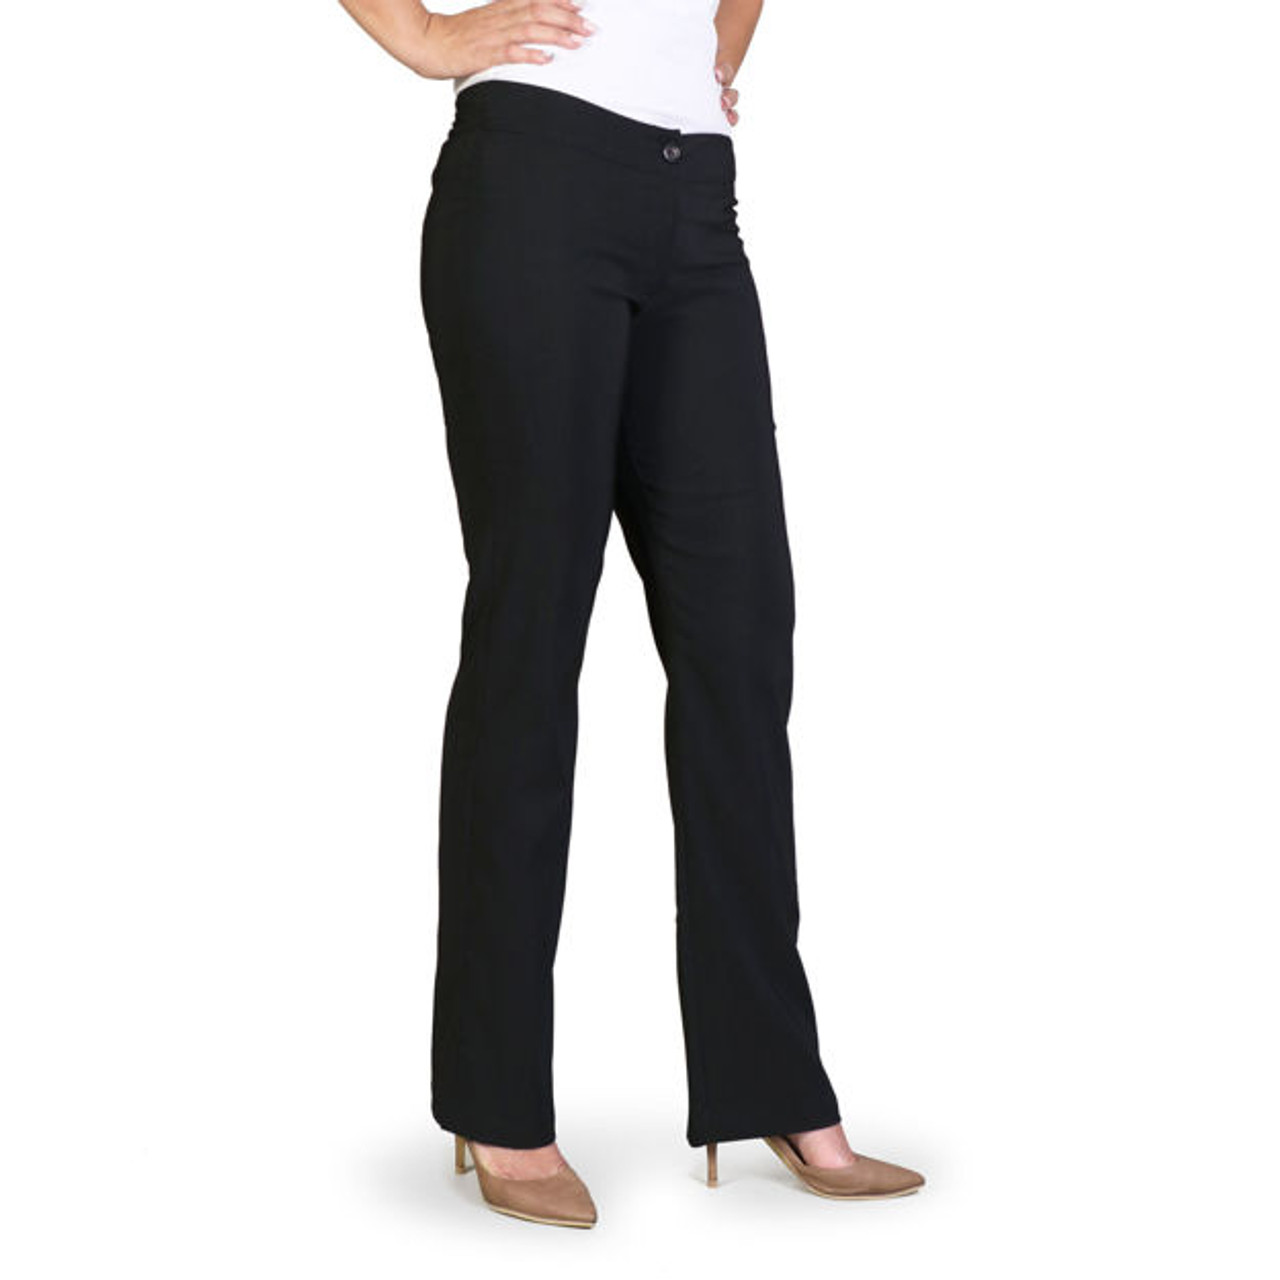 Bengaline Pants| Corporate Ladies Pants | Azulwear Cape Town, South Africa